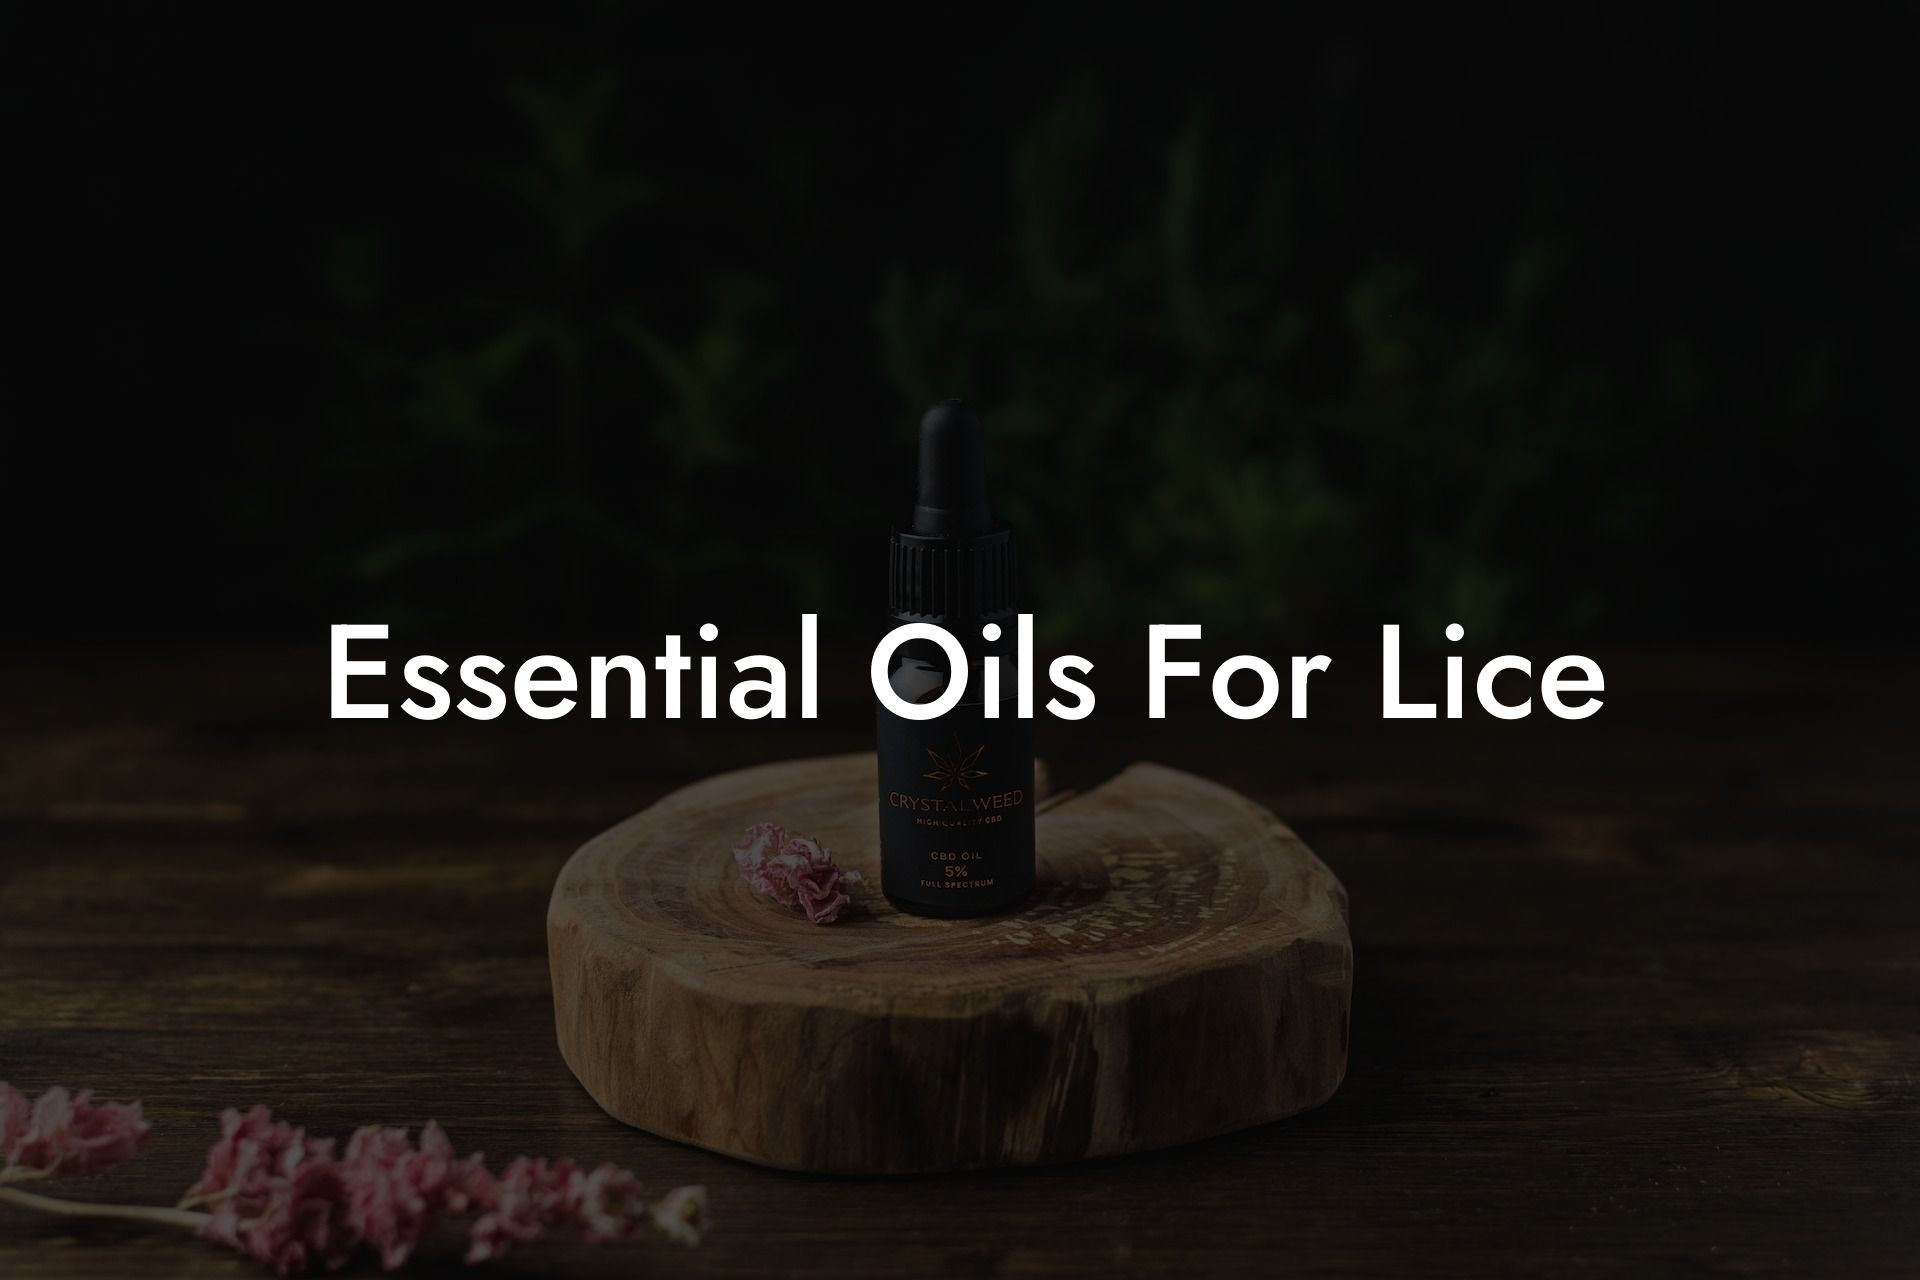 Essential Oils For Lice